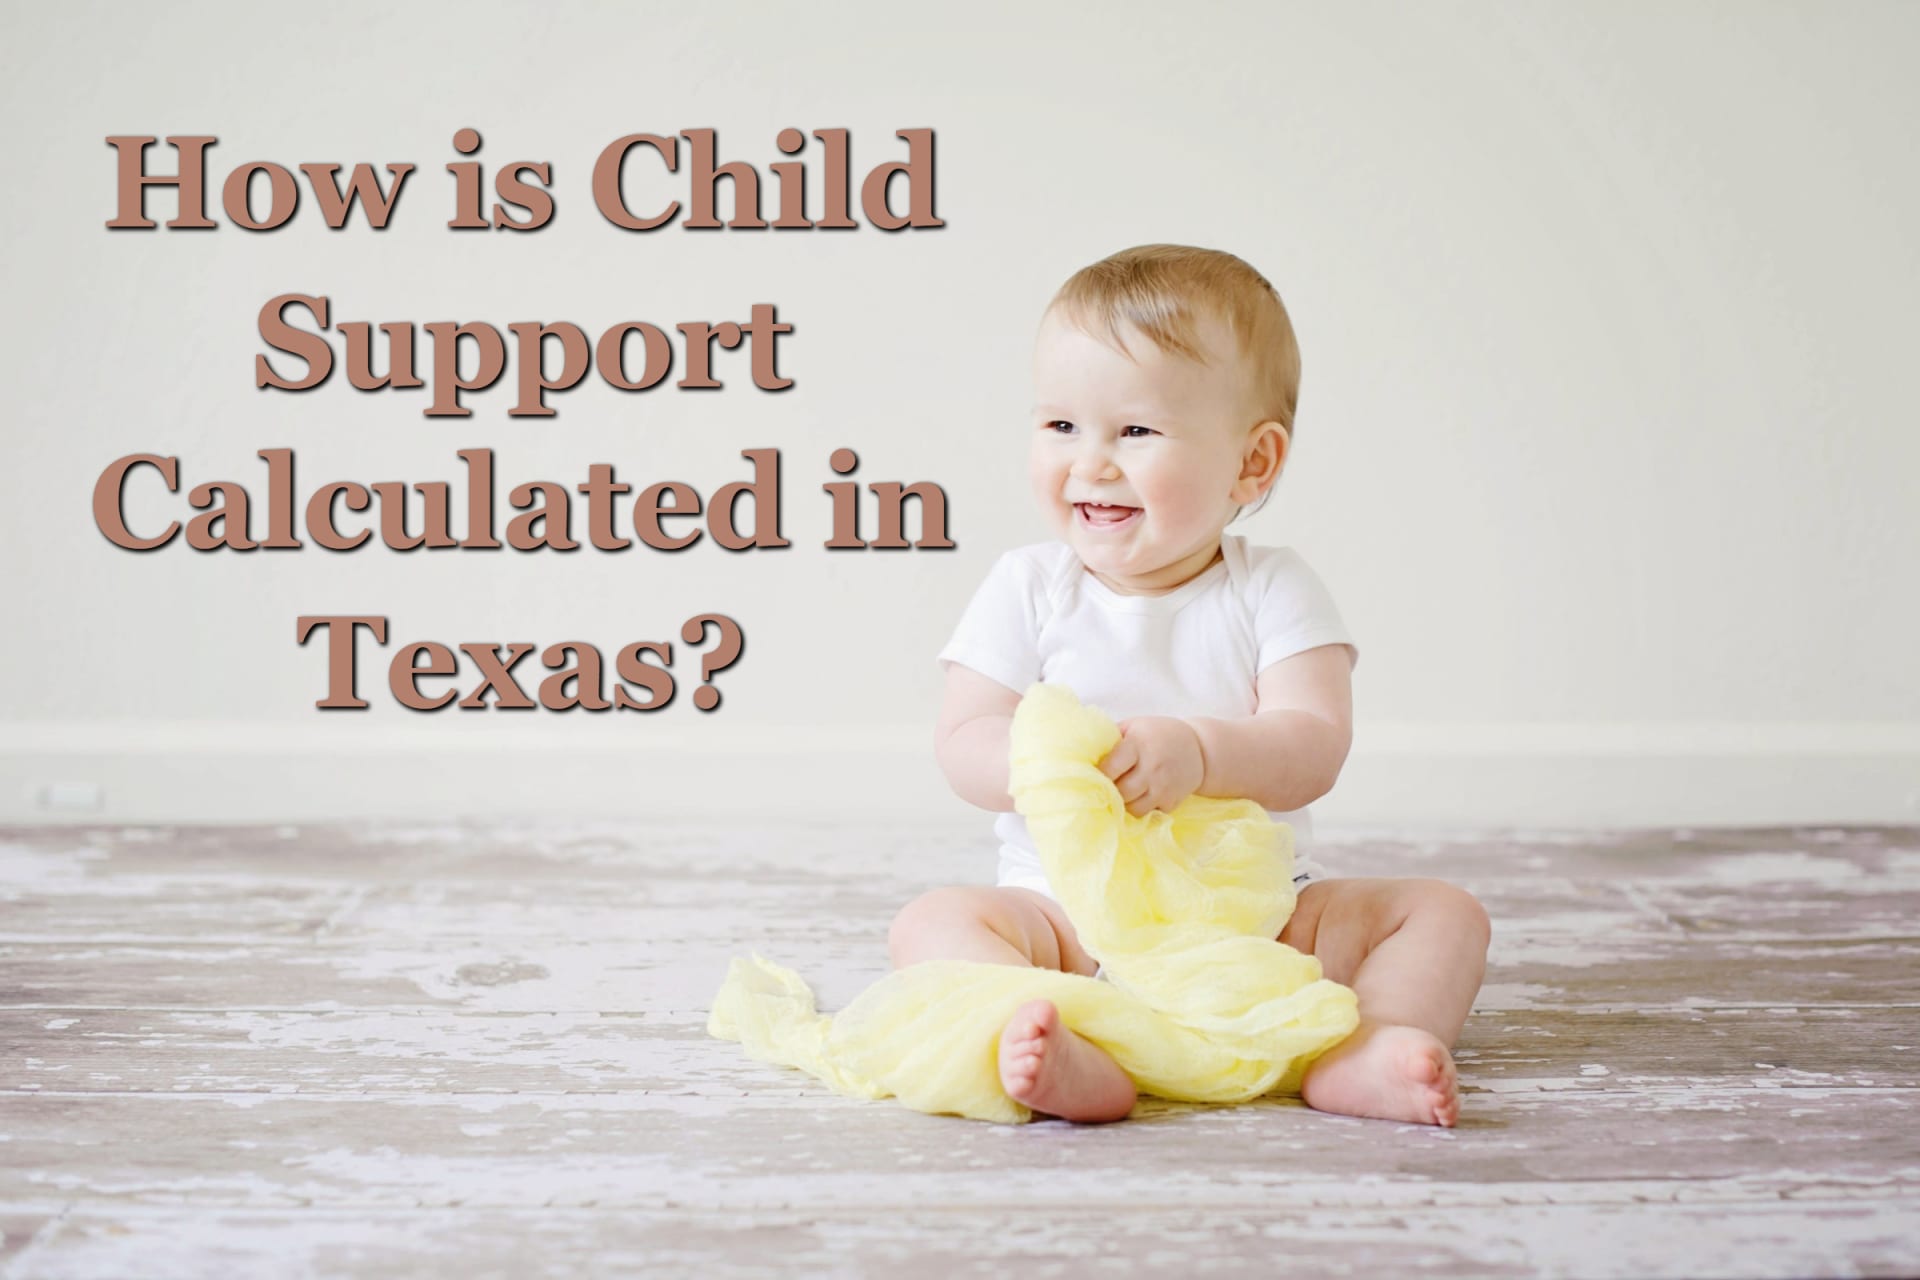 How is Child Support Calculated in Texas?